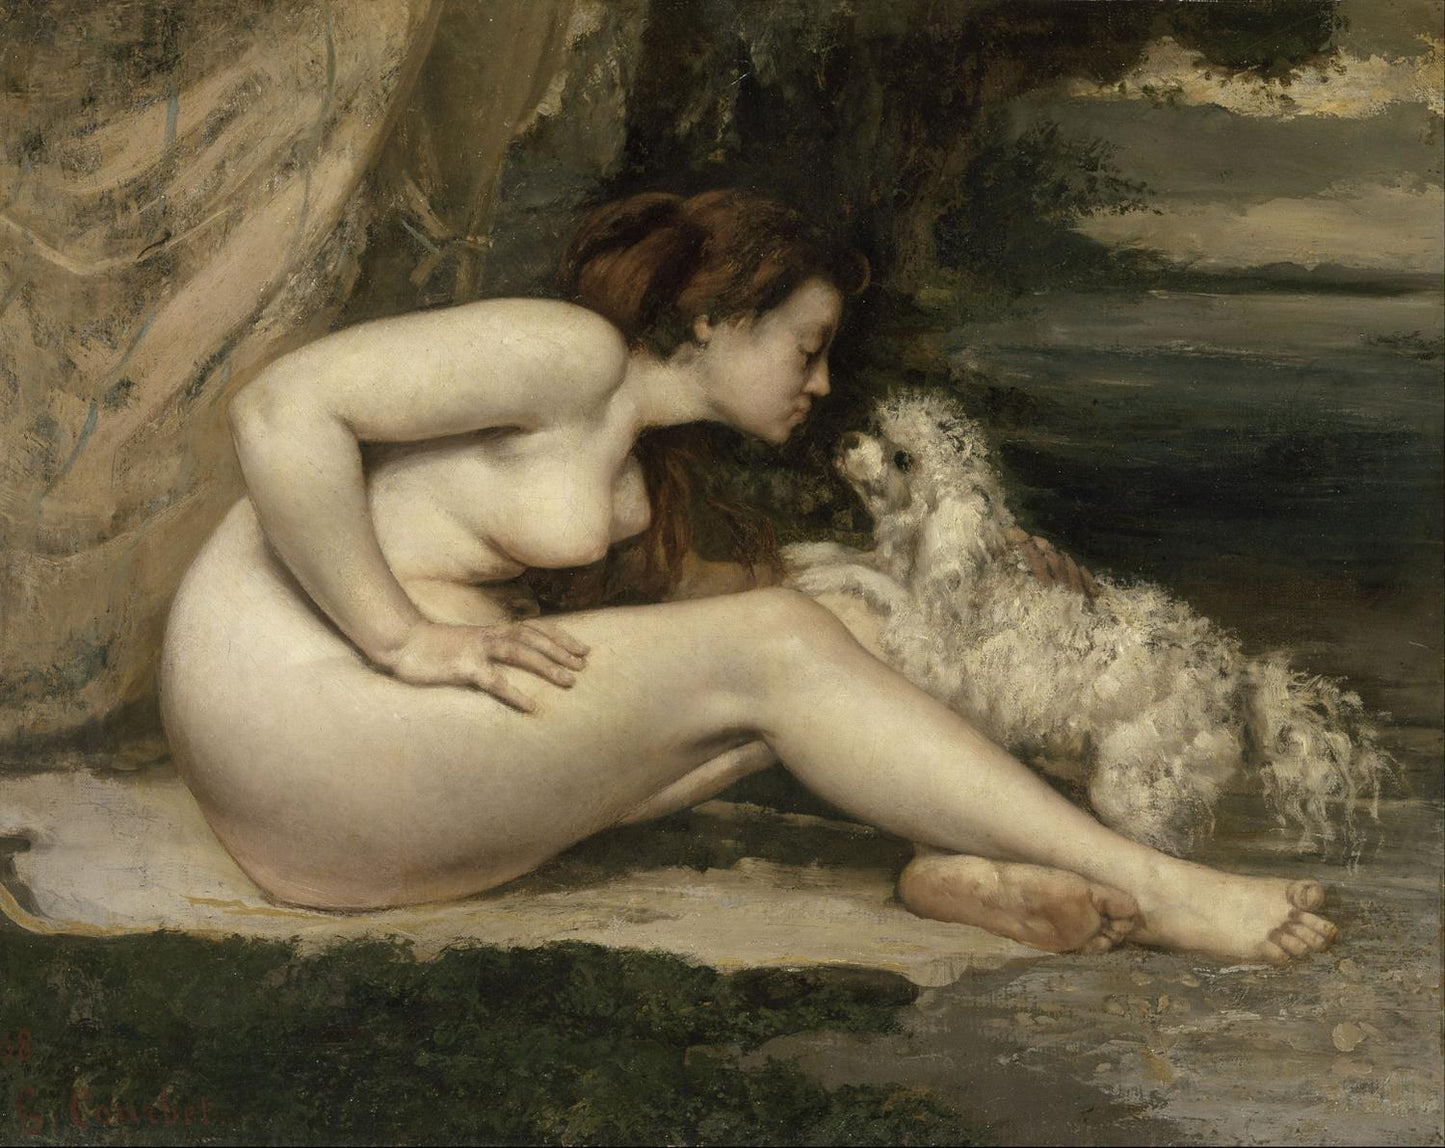 Nude Woman with a Dog, Jean Désiré Gustave Courbet